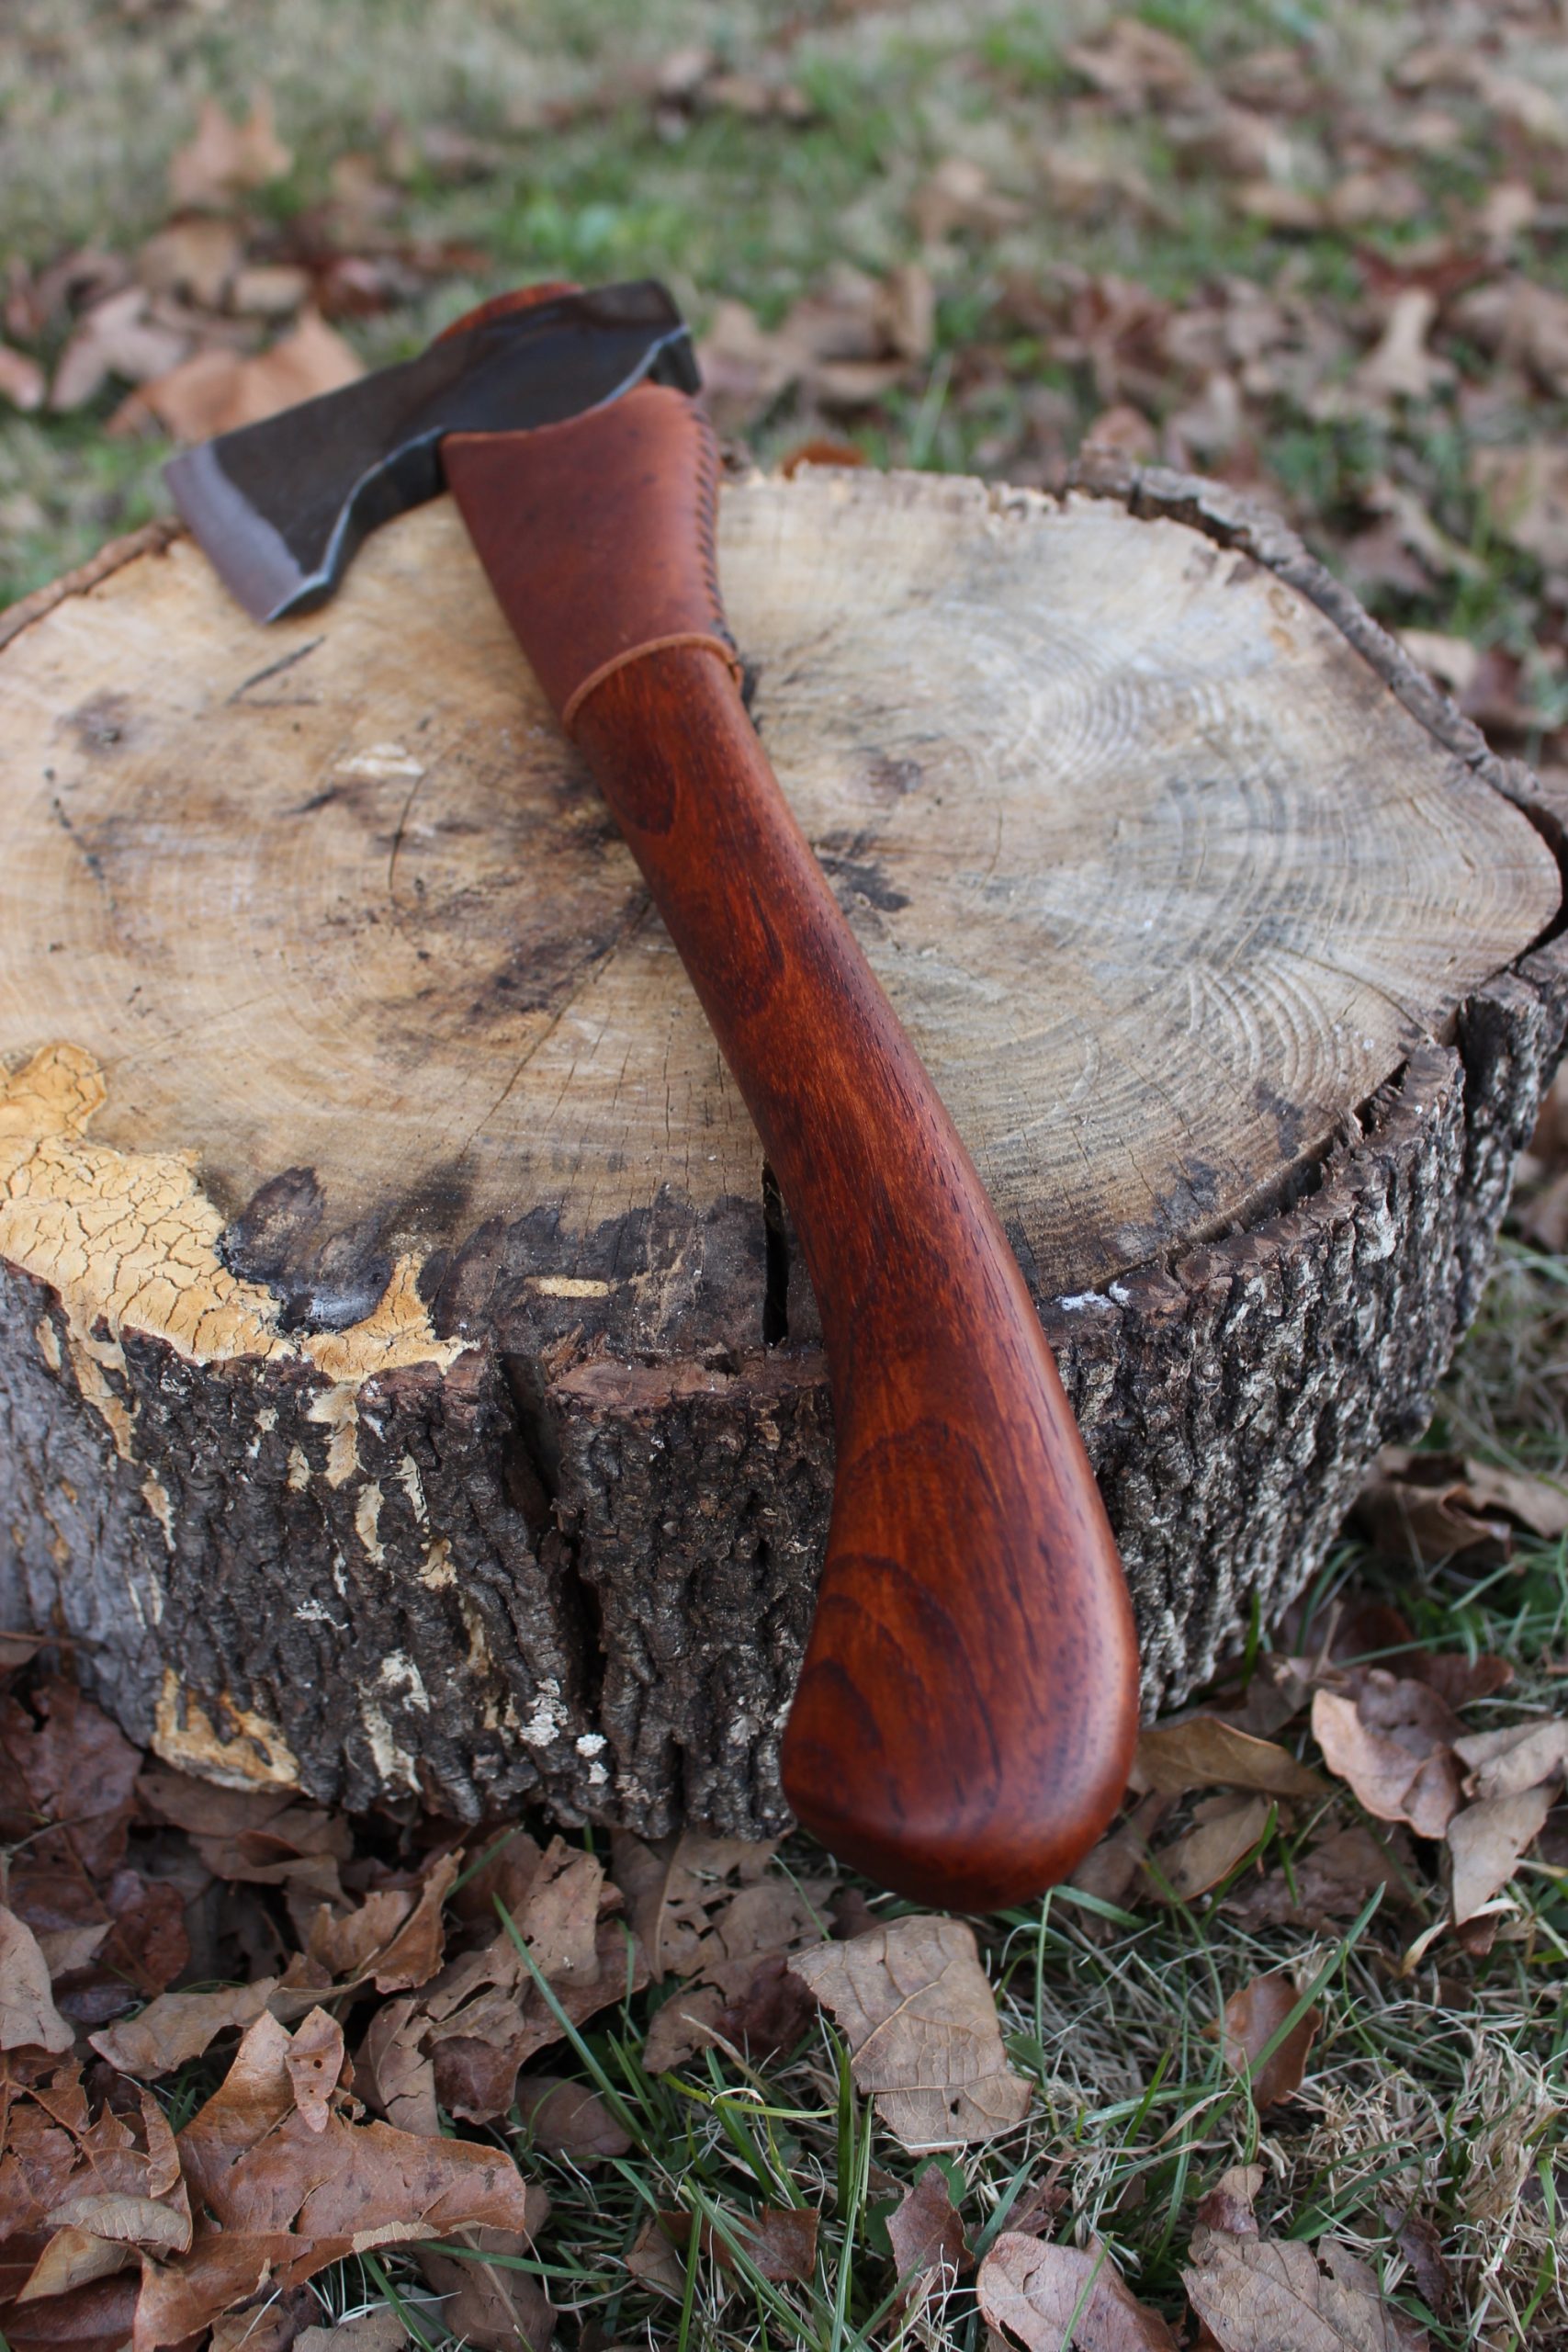 handmade, usa made, usa made axe, hatchet, chopping, wood chopping, outdoor, outdoorsman, survival, backwoodsman, hickory, axe made in america, axes made in the usa, ike bullington, wolf valley forge, valley forge, pack axe, back packing, camping, trail axe, hunting axe, trappers axe, camp axe, bush axe, belt axe, pack axe, leather shoulder rig, chopping axe, leather axe carrier, shoulder sling for axe, carpenter's axe, Wolf Valley Forge, Wolf Valley Forge axe release, Axe Wax, haversack, go back, man purse, man bag, canvas bag, reenactor, reenacting, Trekker Axe, Axe Life